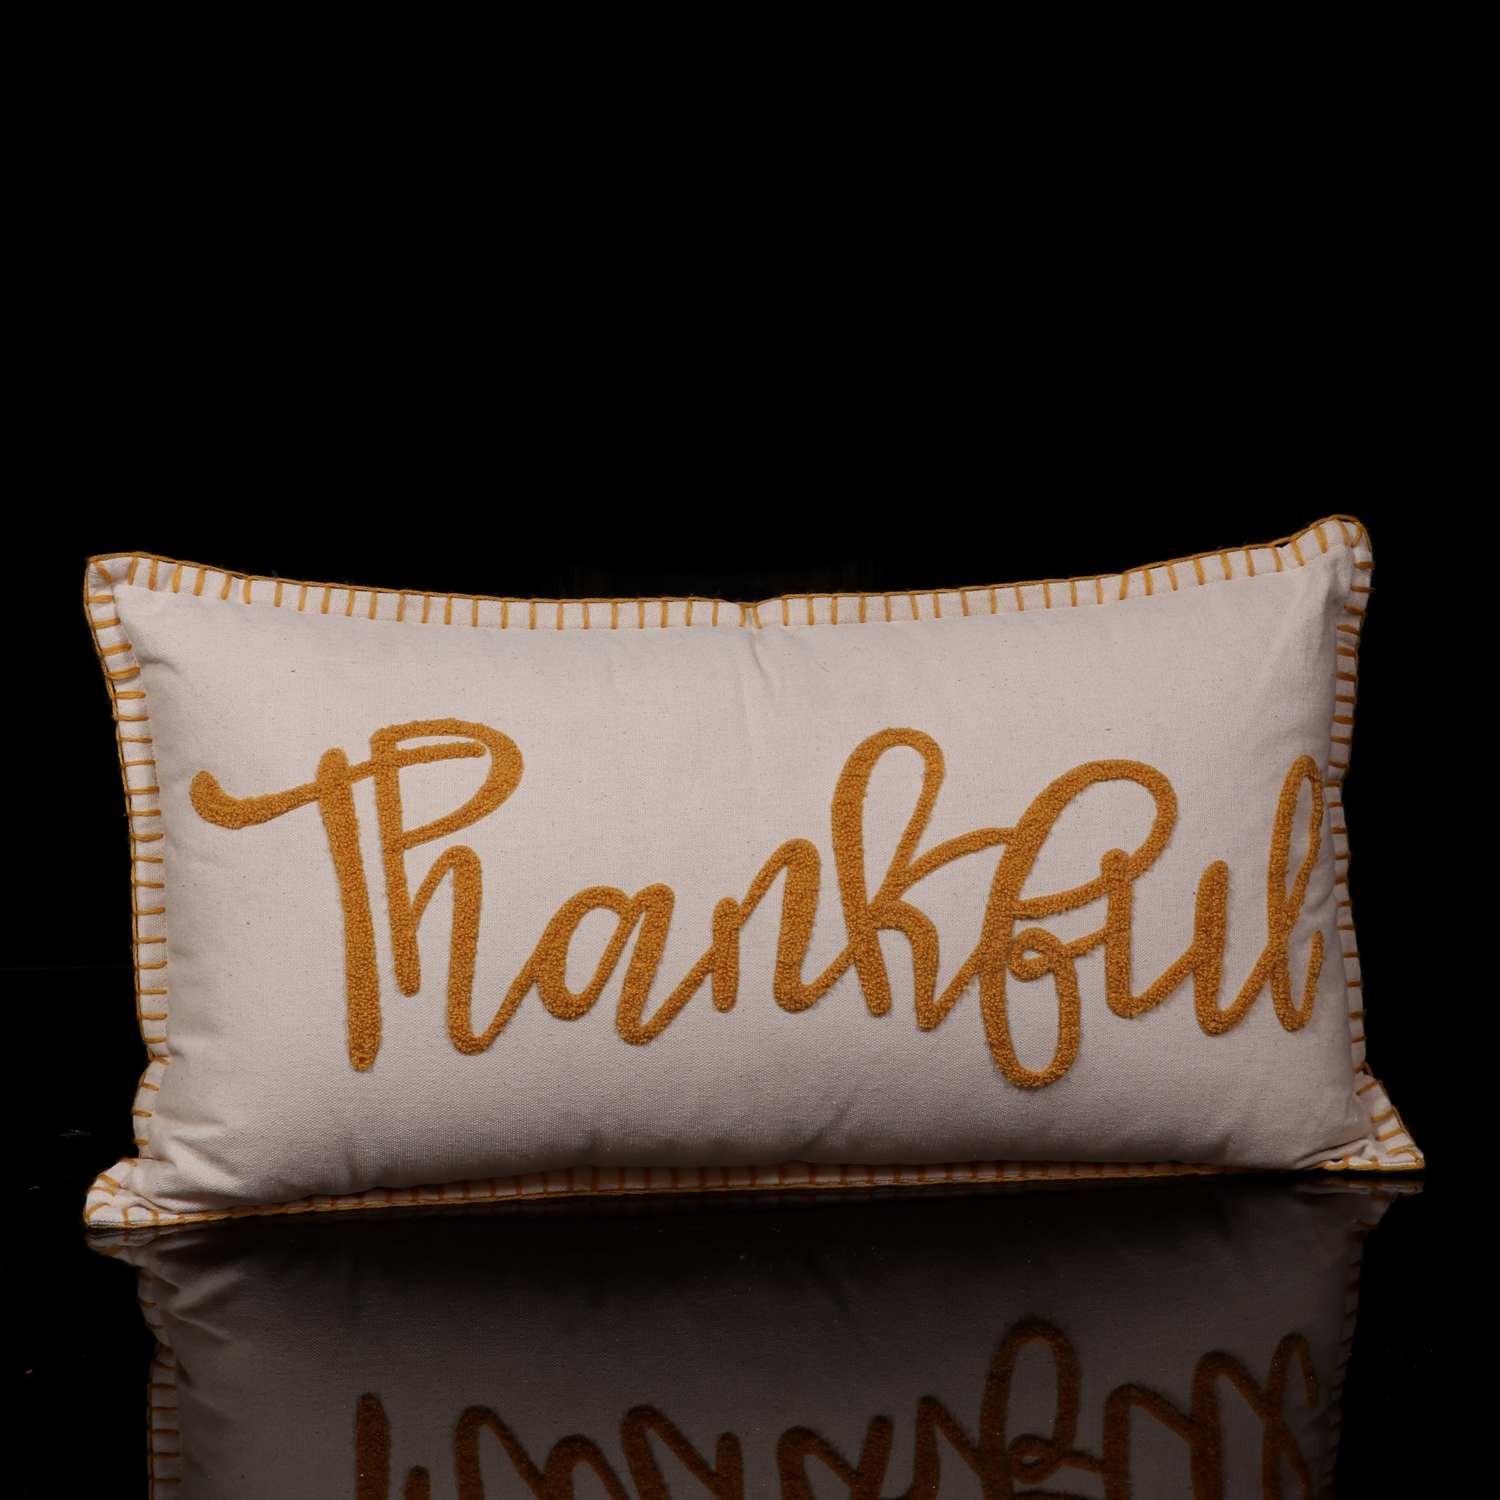 EMBROIDED THANKFUL DESIGN LUMBAR PILLOW WITH HAMMING ON EDGES